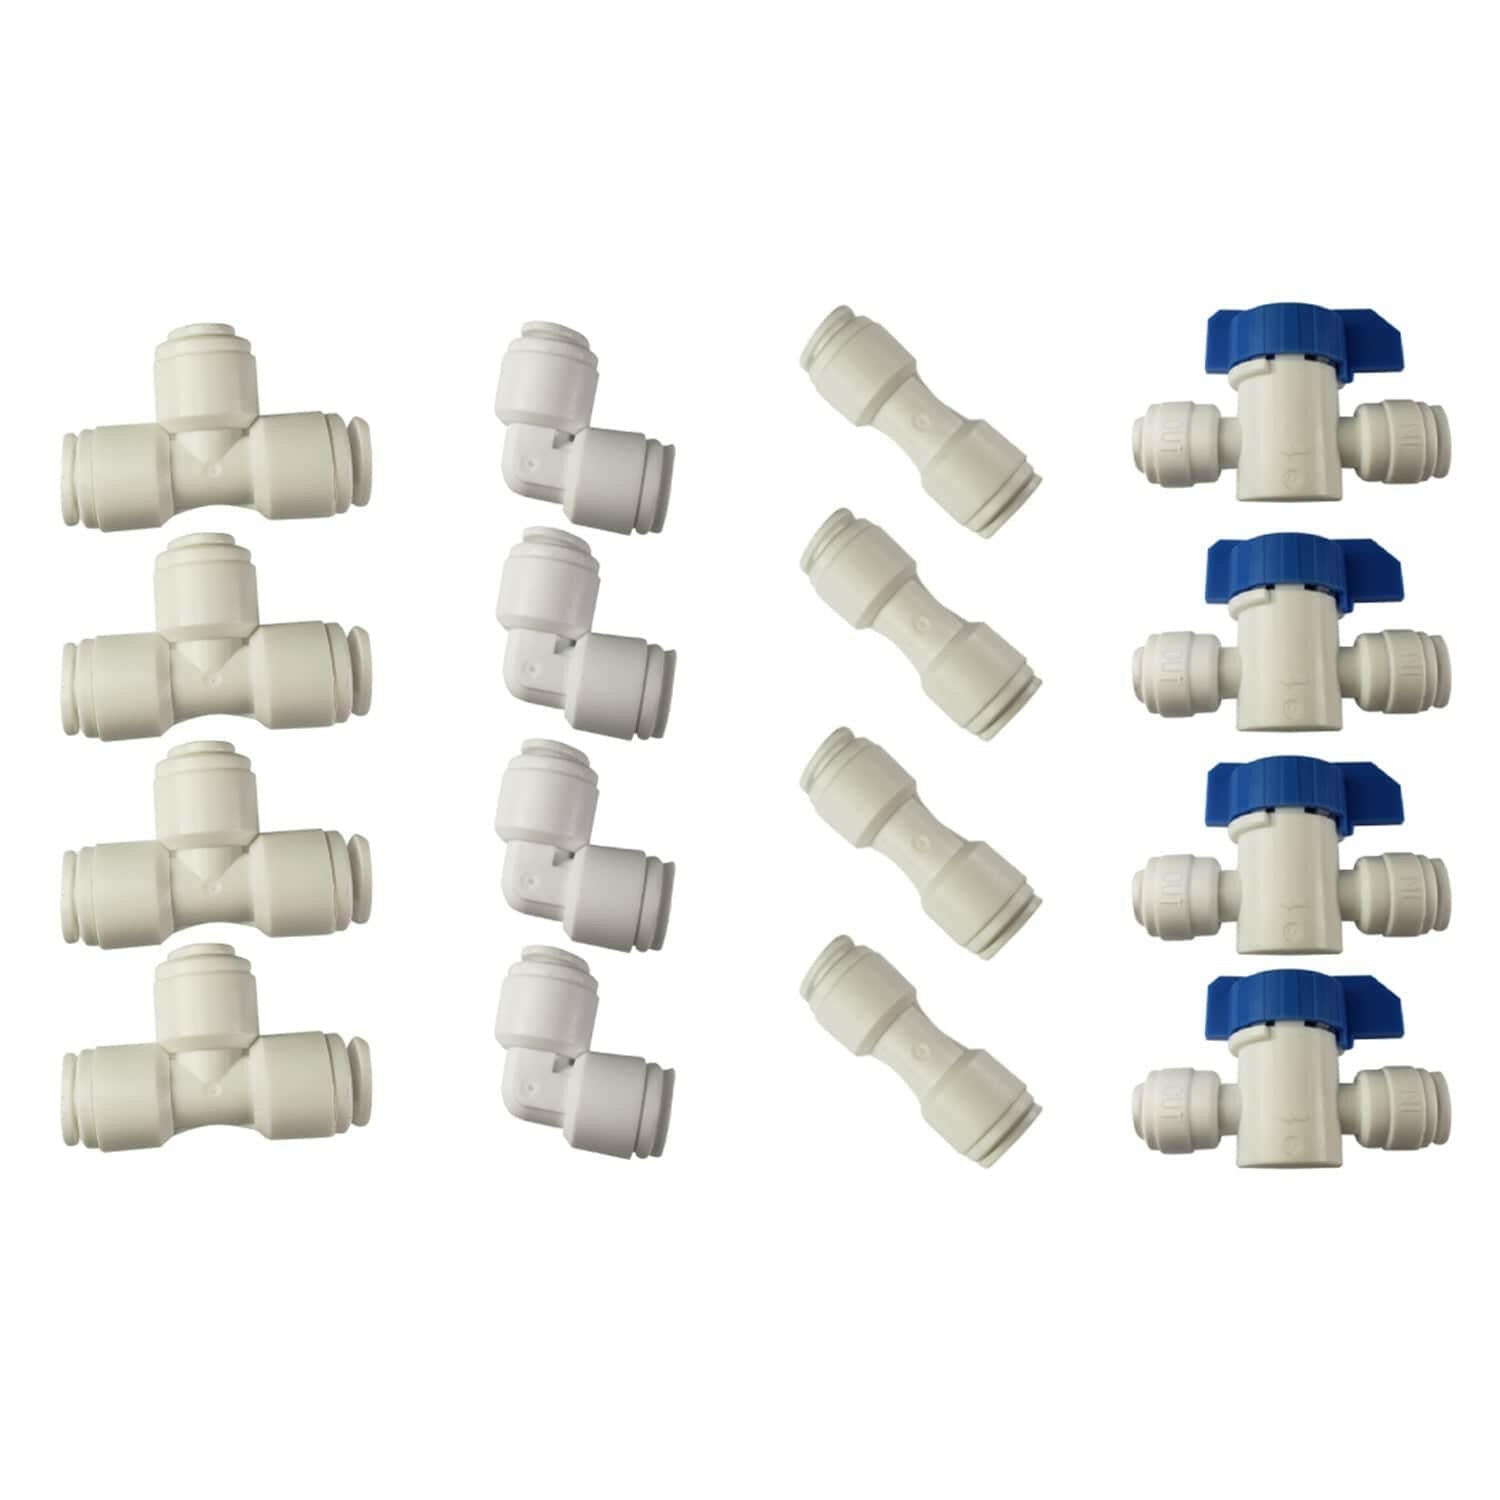 1/4" Quick Connect Reverse Osmosis Fittings Variety 16 Pack